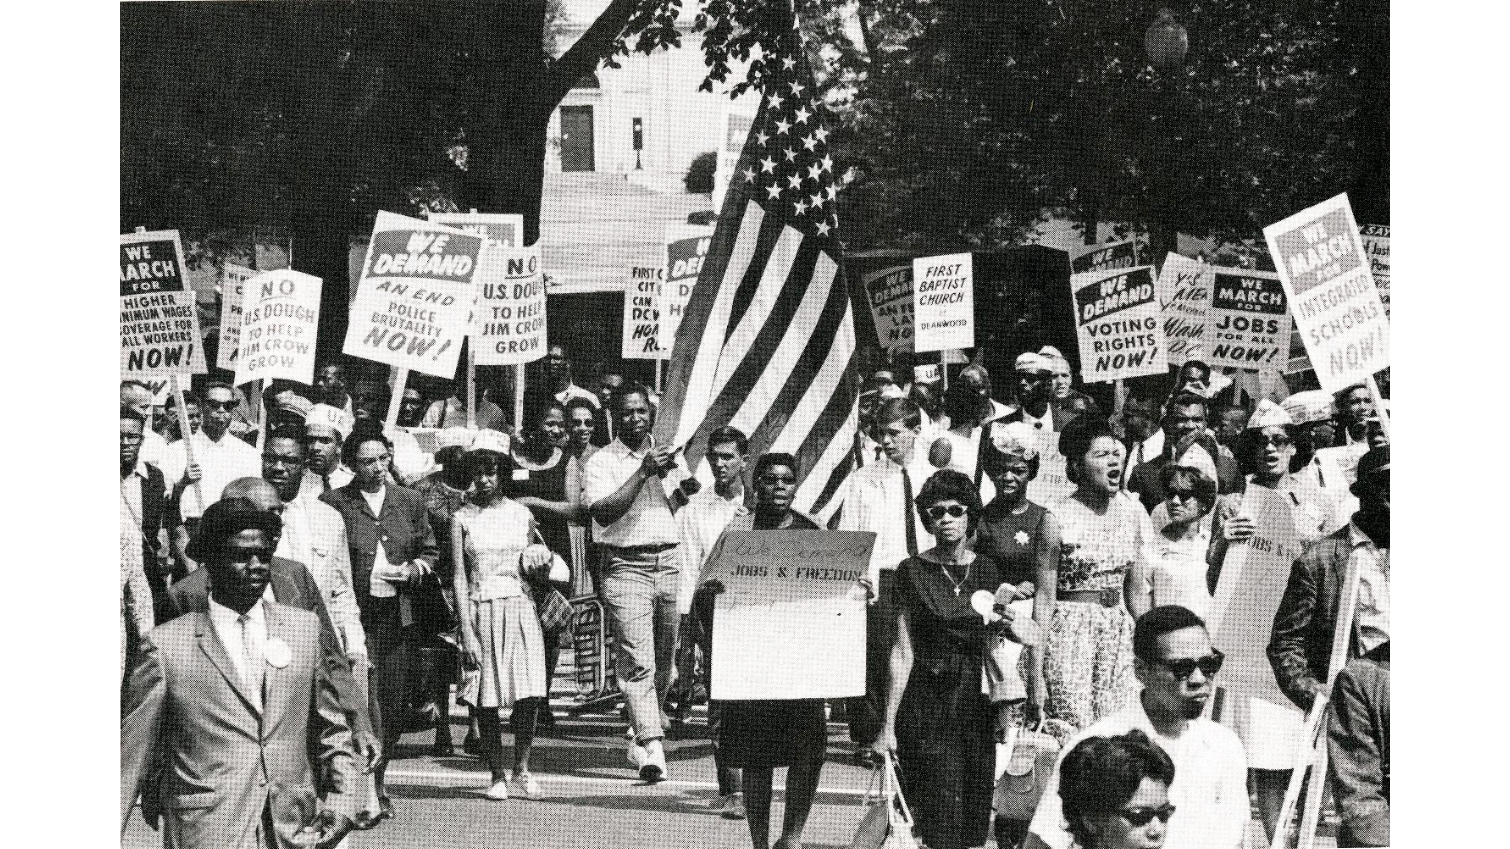 Photograph of Participants in 1963 March on Washington